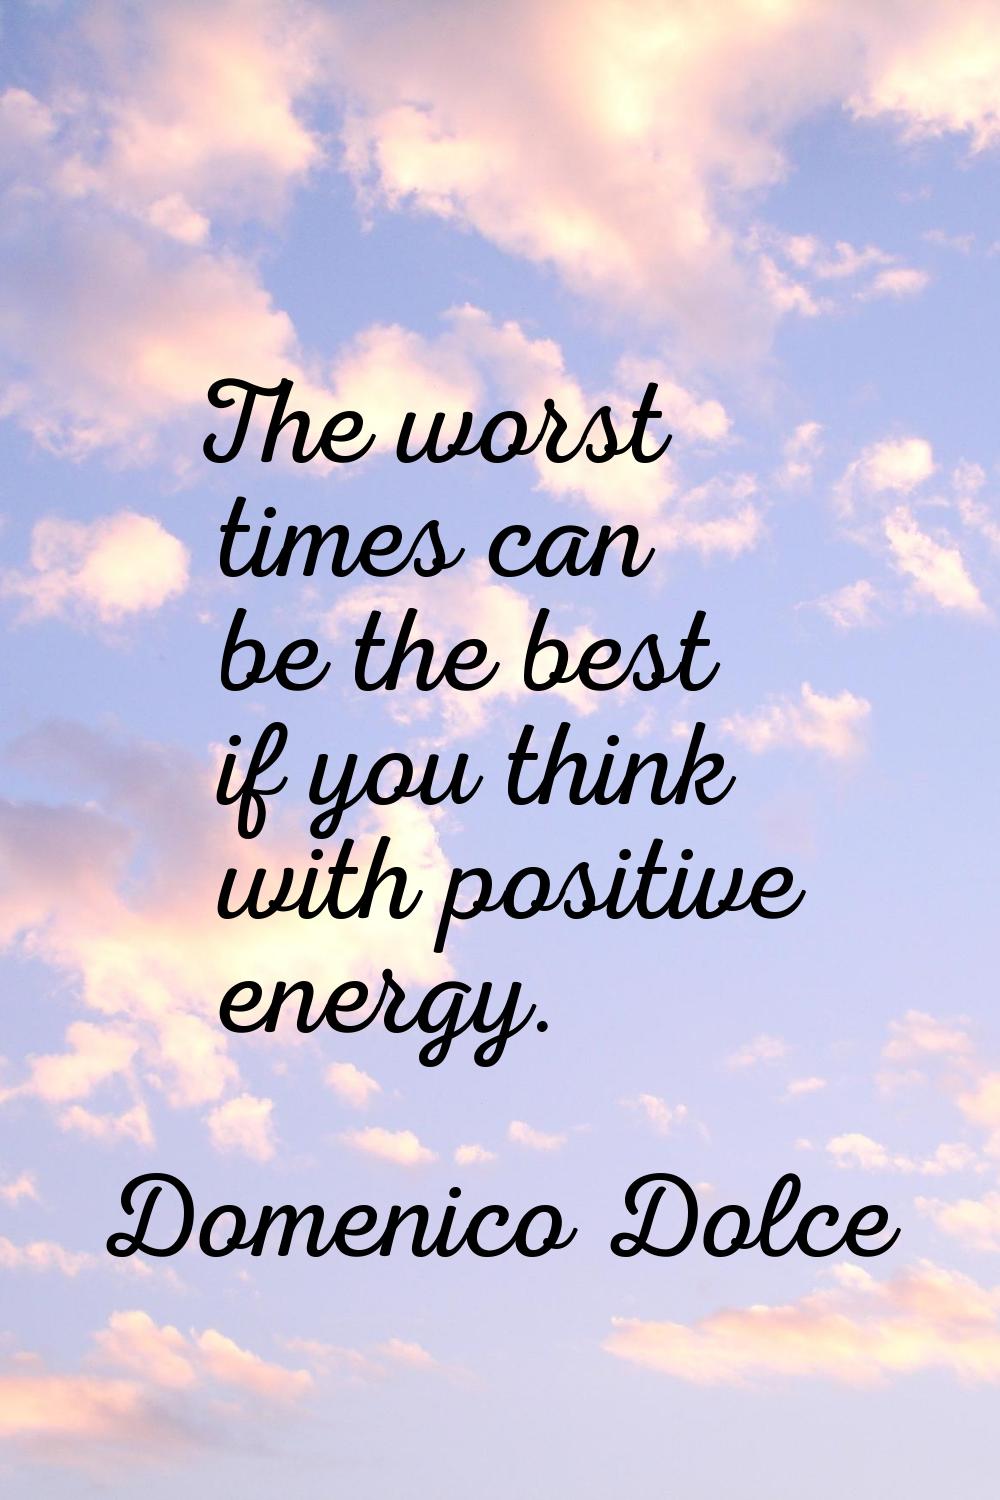 The worst times can be the best if you think with positive energy.